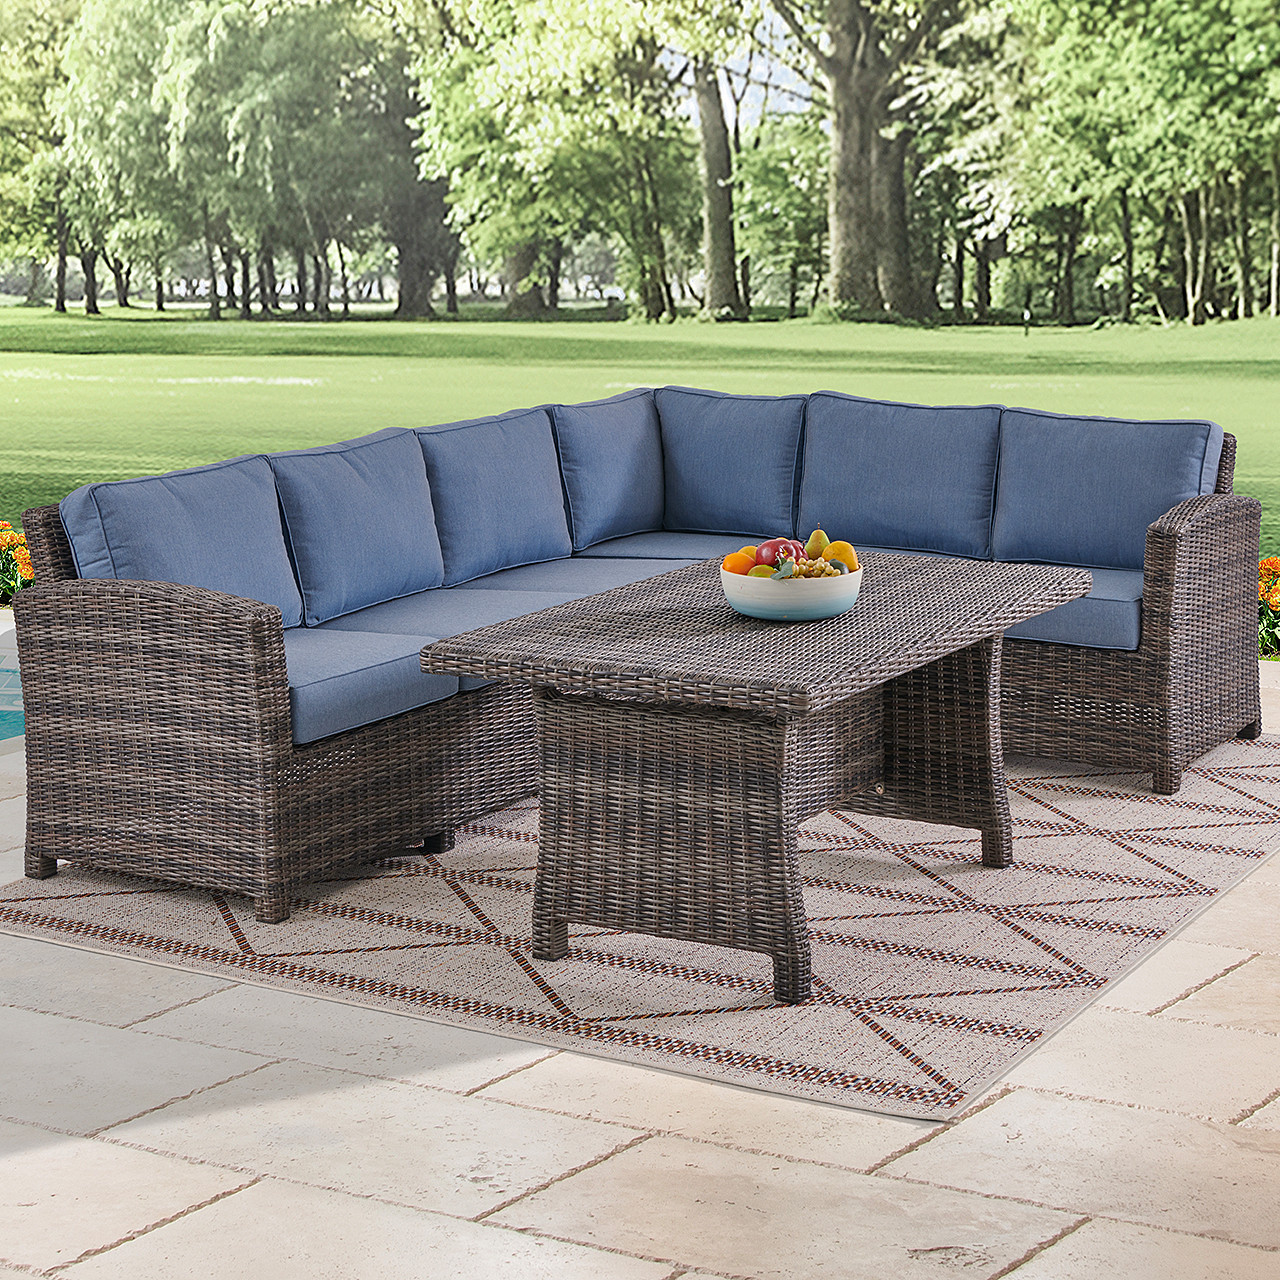 Venice Silver Oak Outdoor Wicker with Cushions 5 Piece Sectional + 59 x 32 in. Woven Top Lounge Table